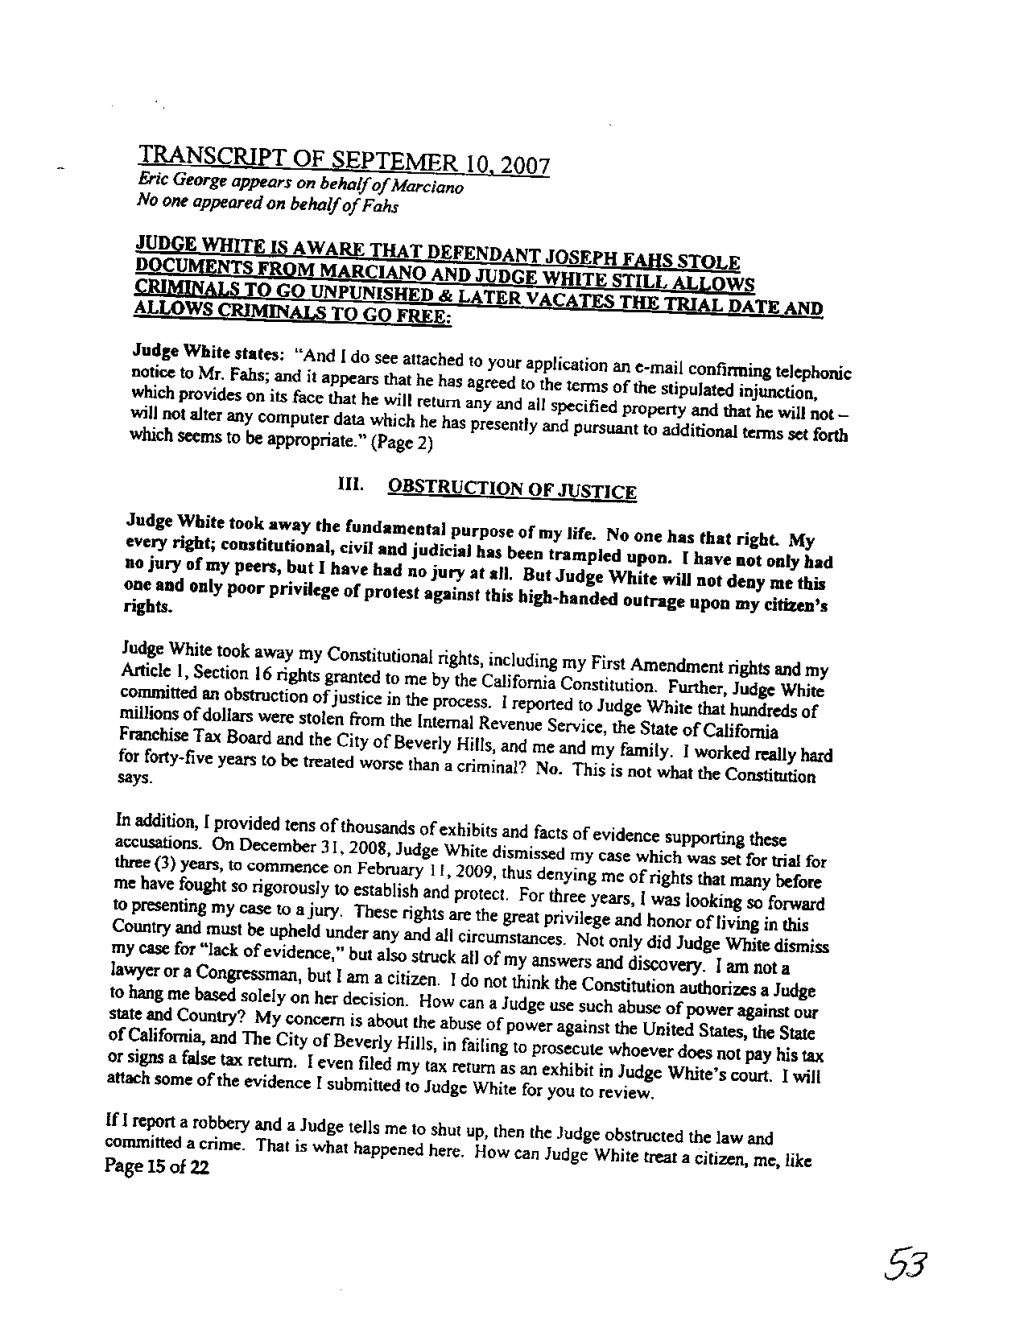 full complaint judge white for federal with exhibits_1_page44